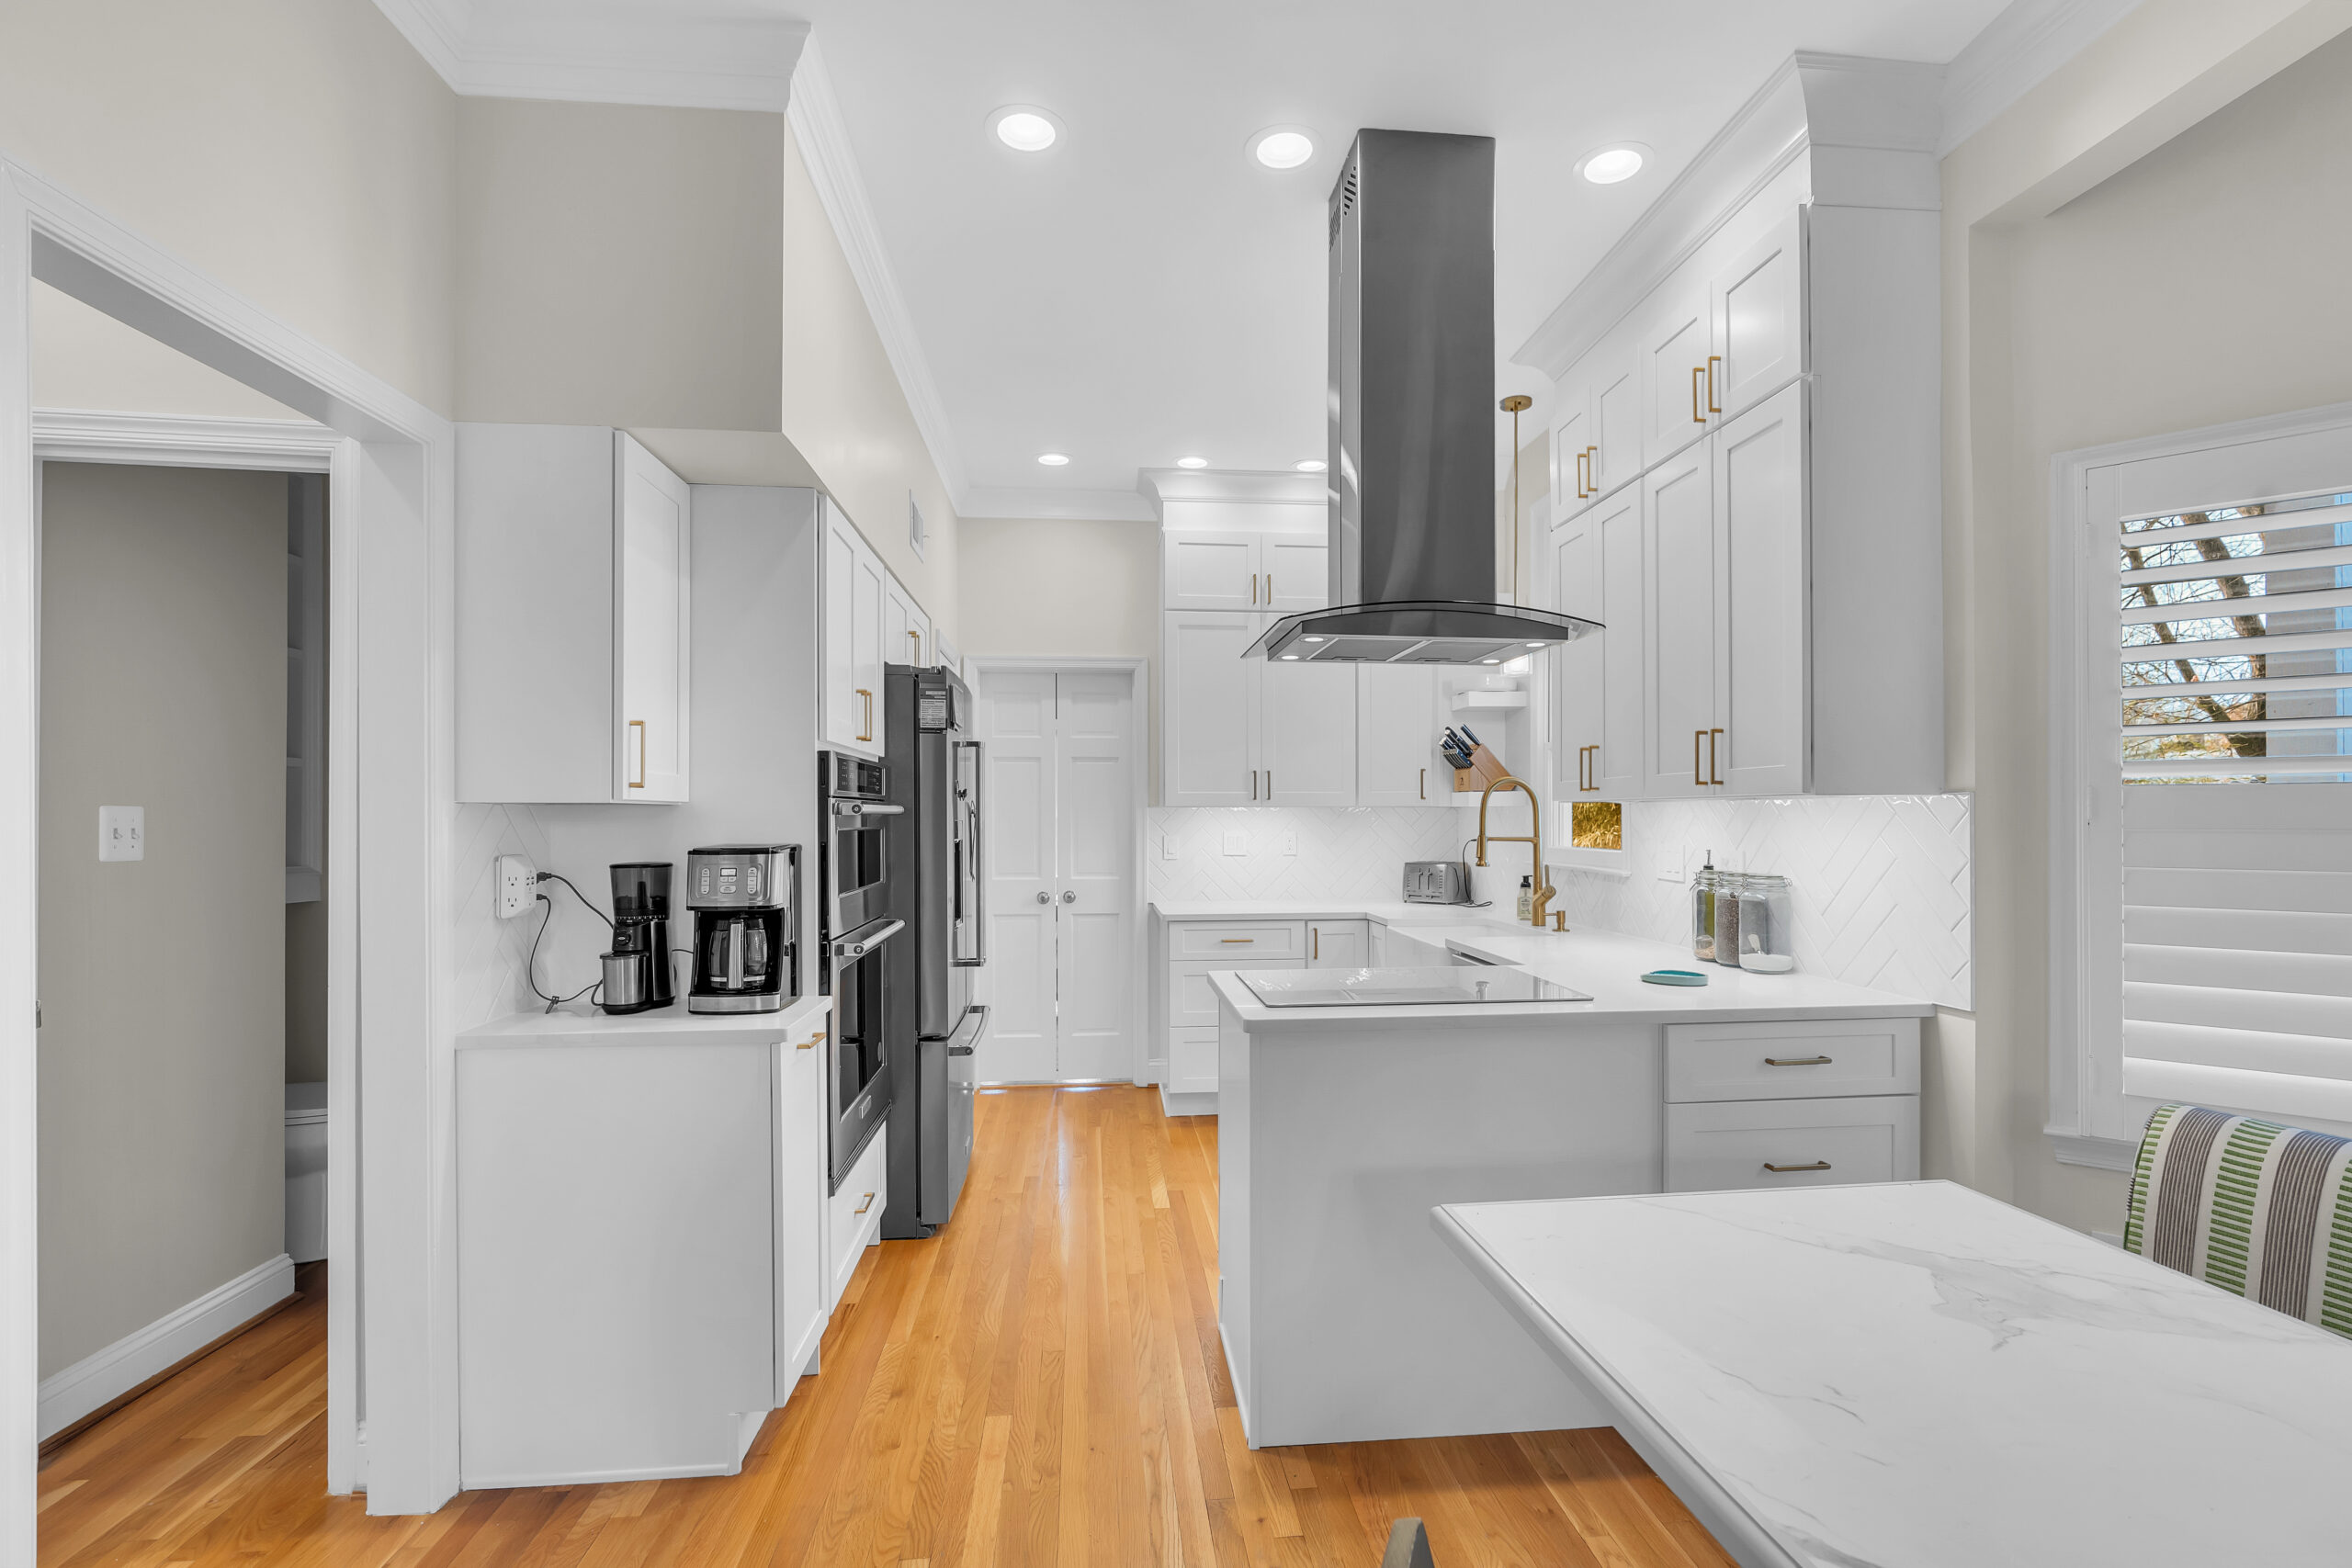 White kitchen design with shaker cabinets and wood flooring